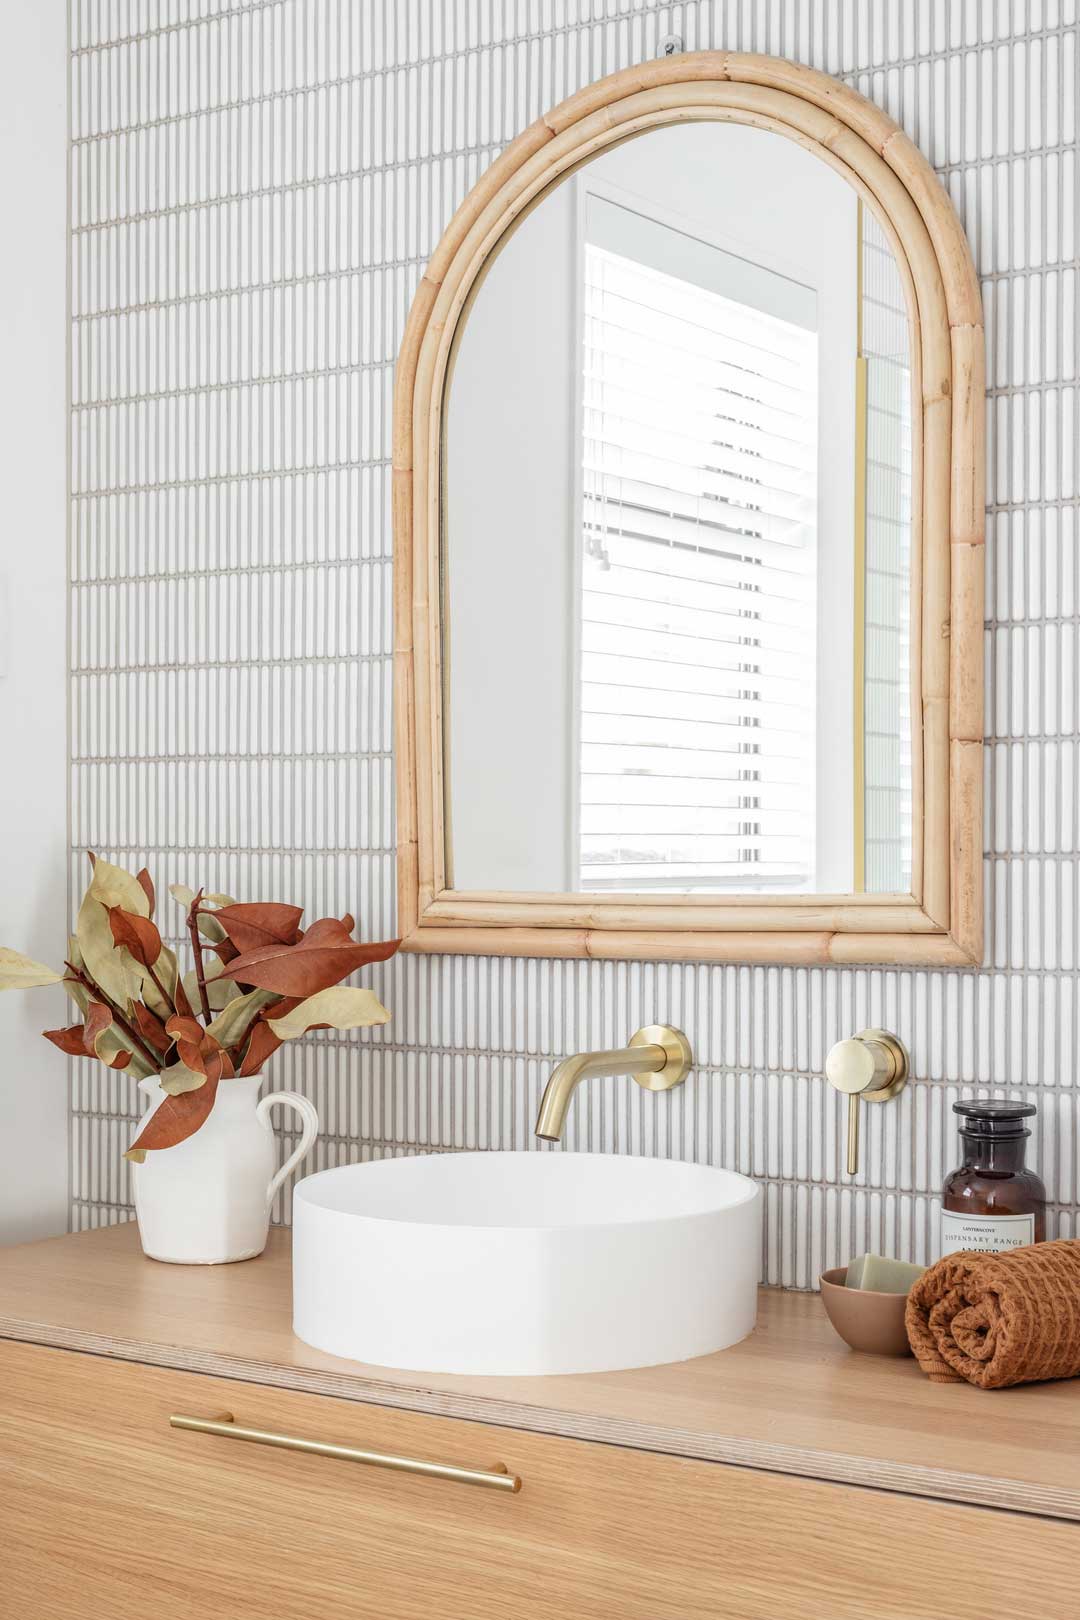 Upgrade your bathroom with small changes like a new basin